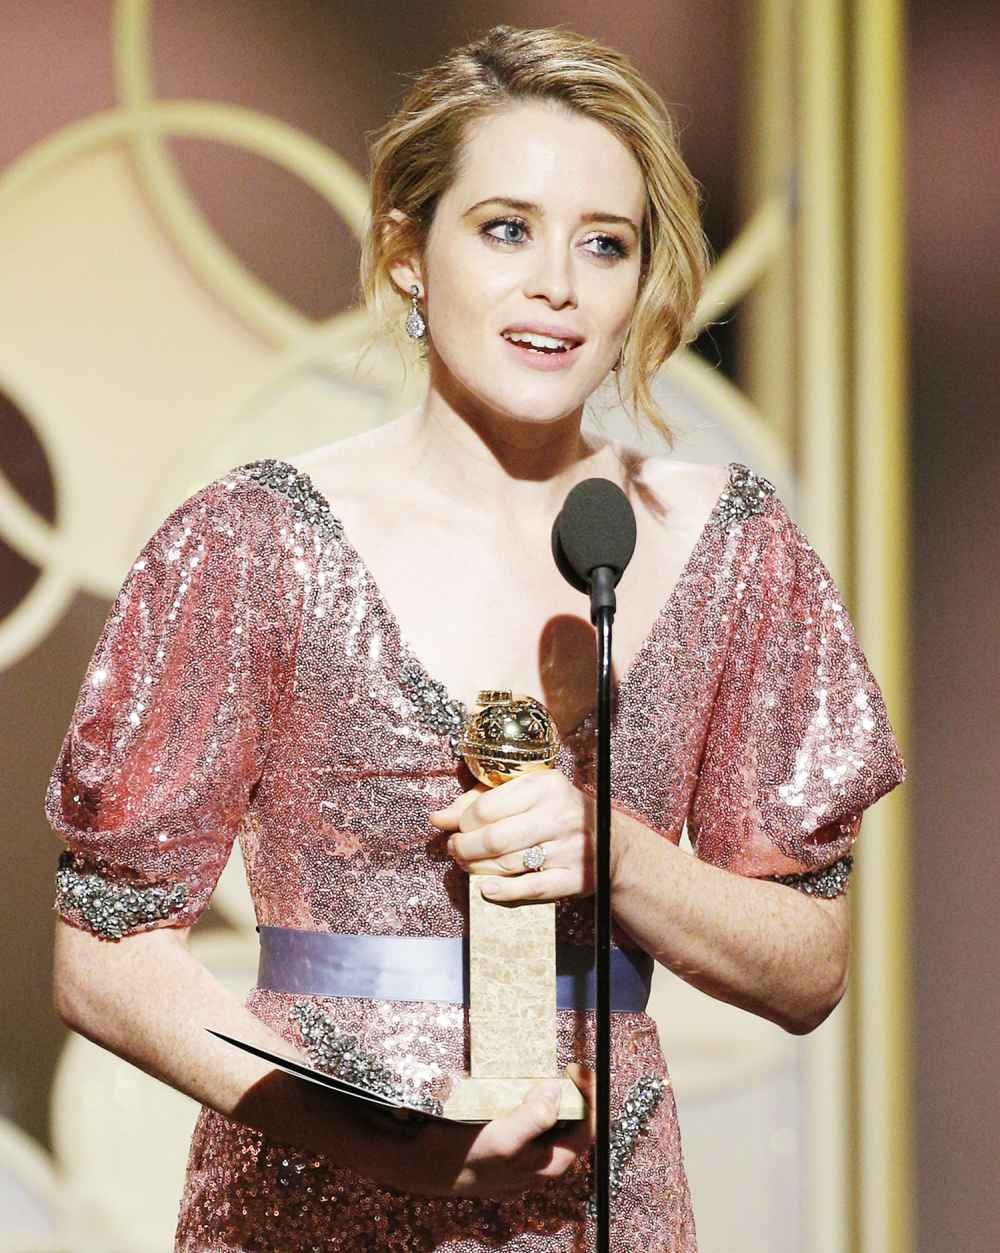 Claire Foy accepts the award for Best Actress in a TV Series - Drama for her role in